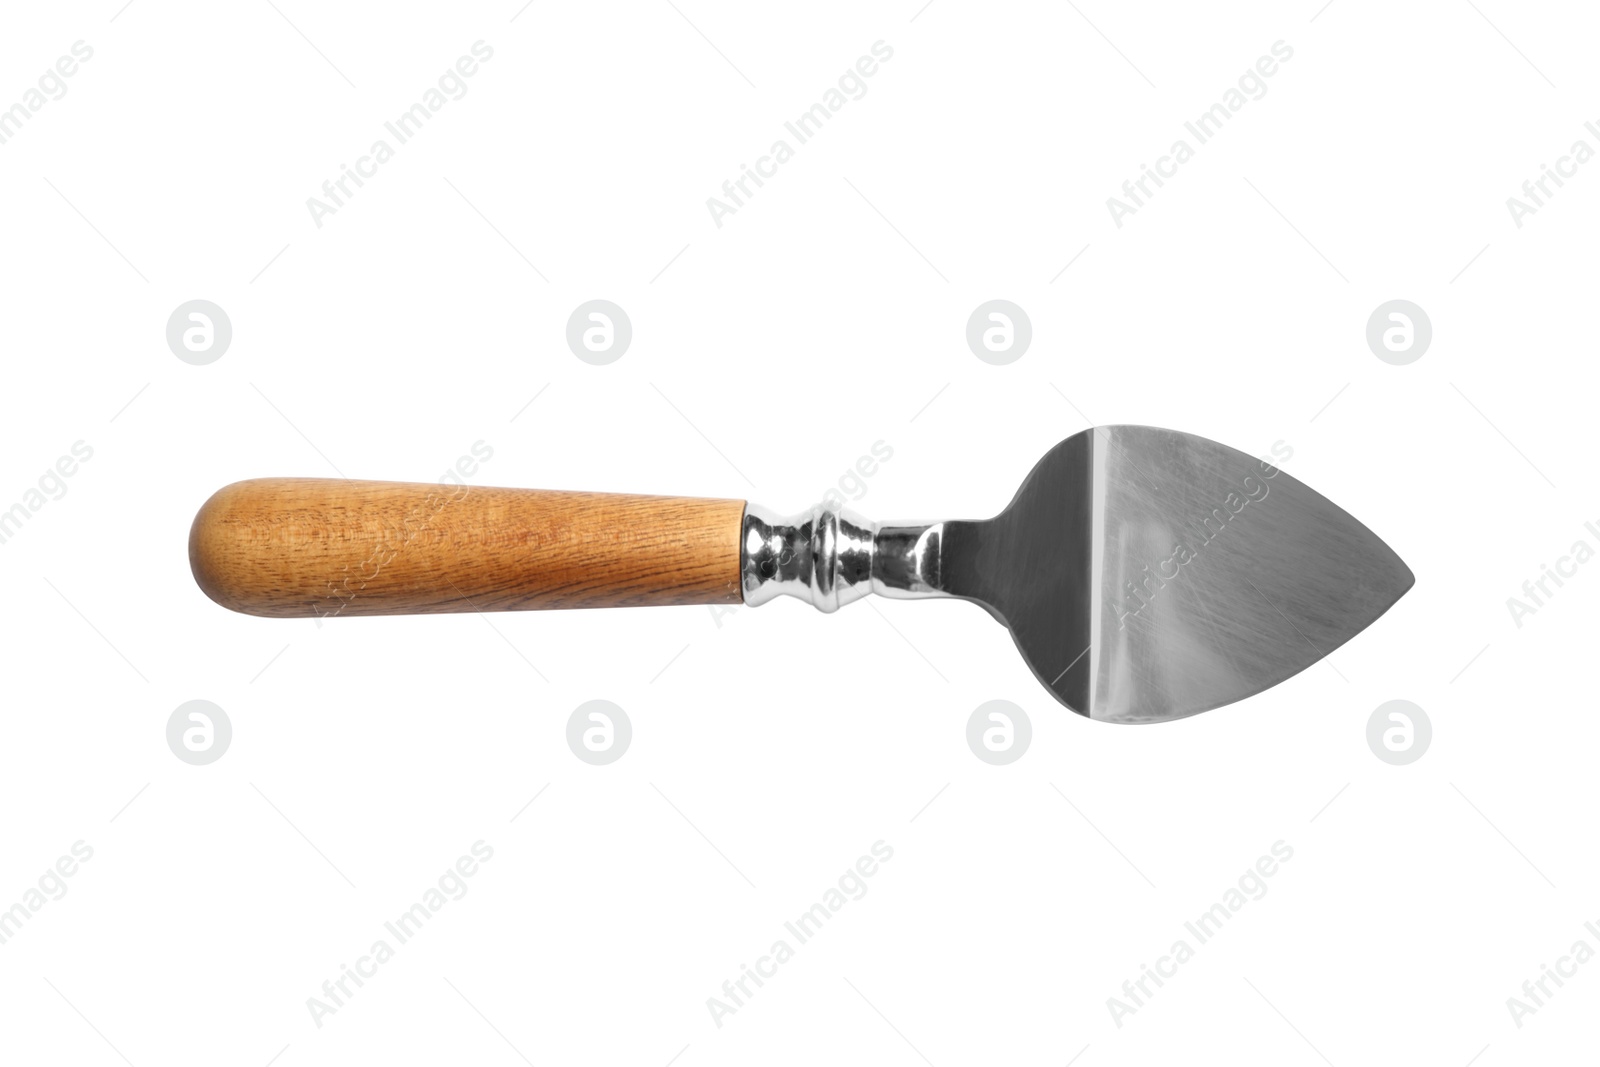 Photo of Parm cheese knife with wooden handle isolated on white